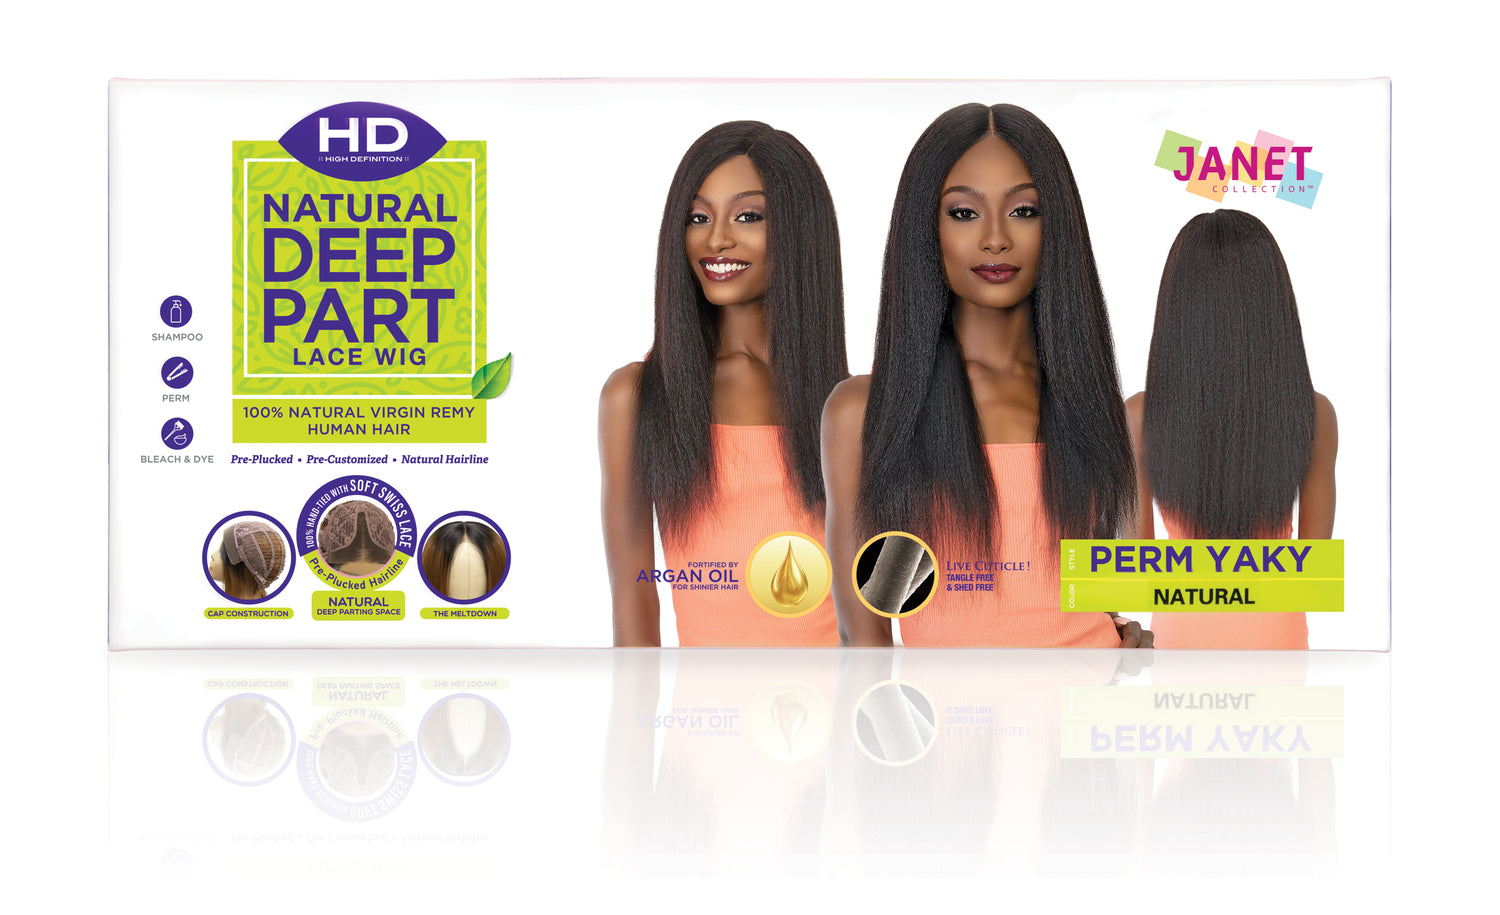 JANET COLLECTIONS - NATURAL DEEP PART LACE PERM YAKY WIG